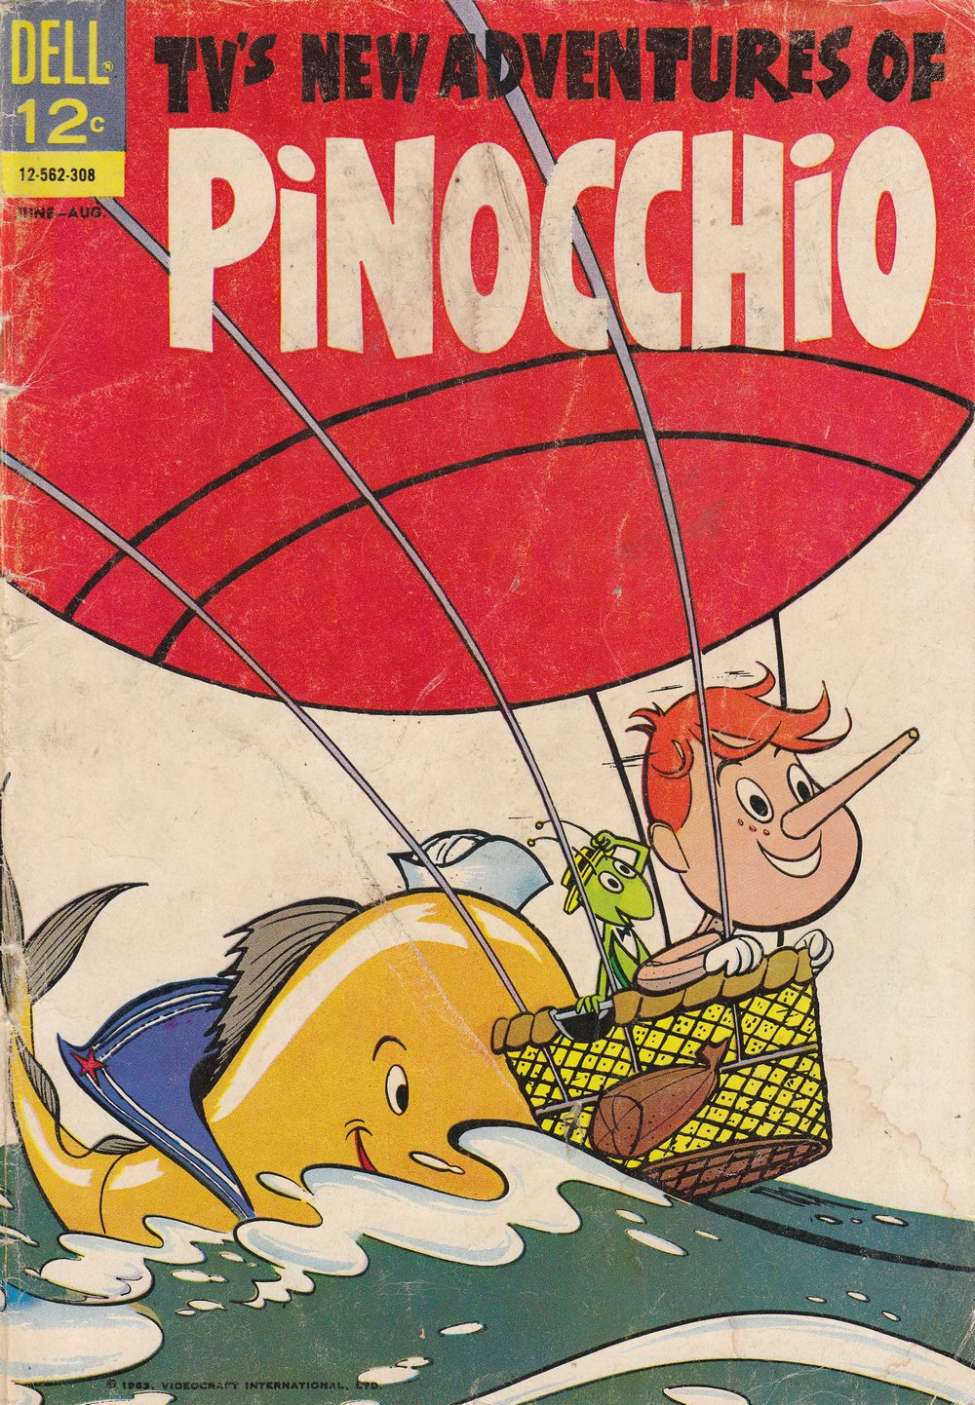 Book Cover For New Adventures of Pinocchio 2